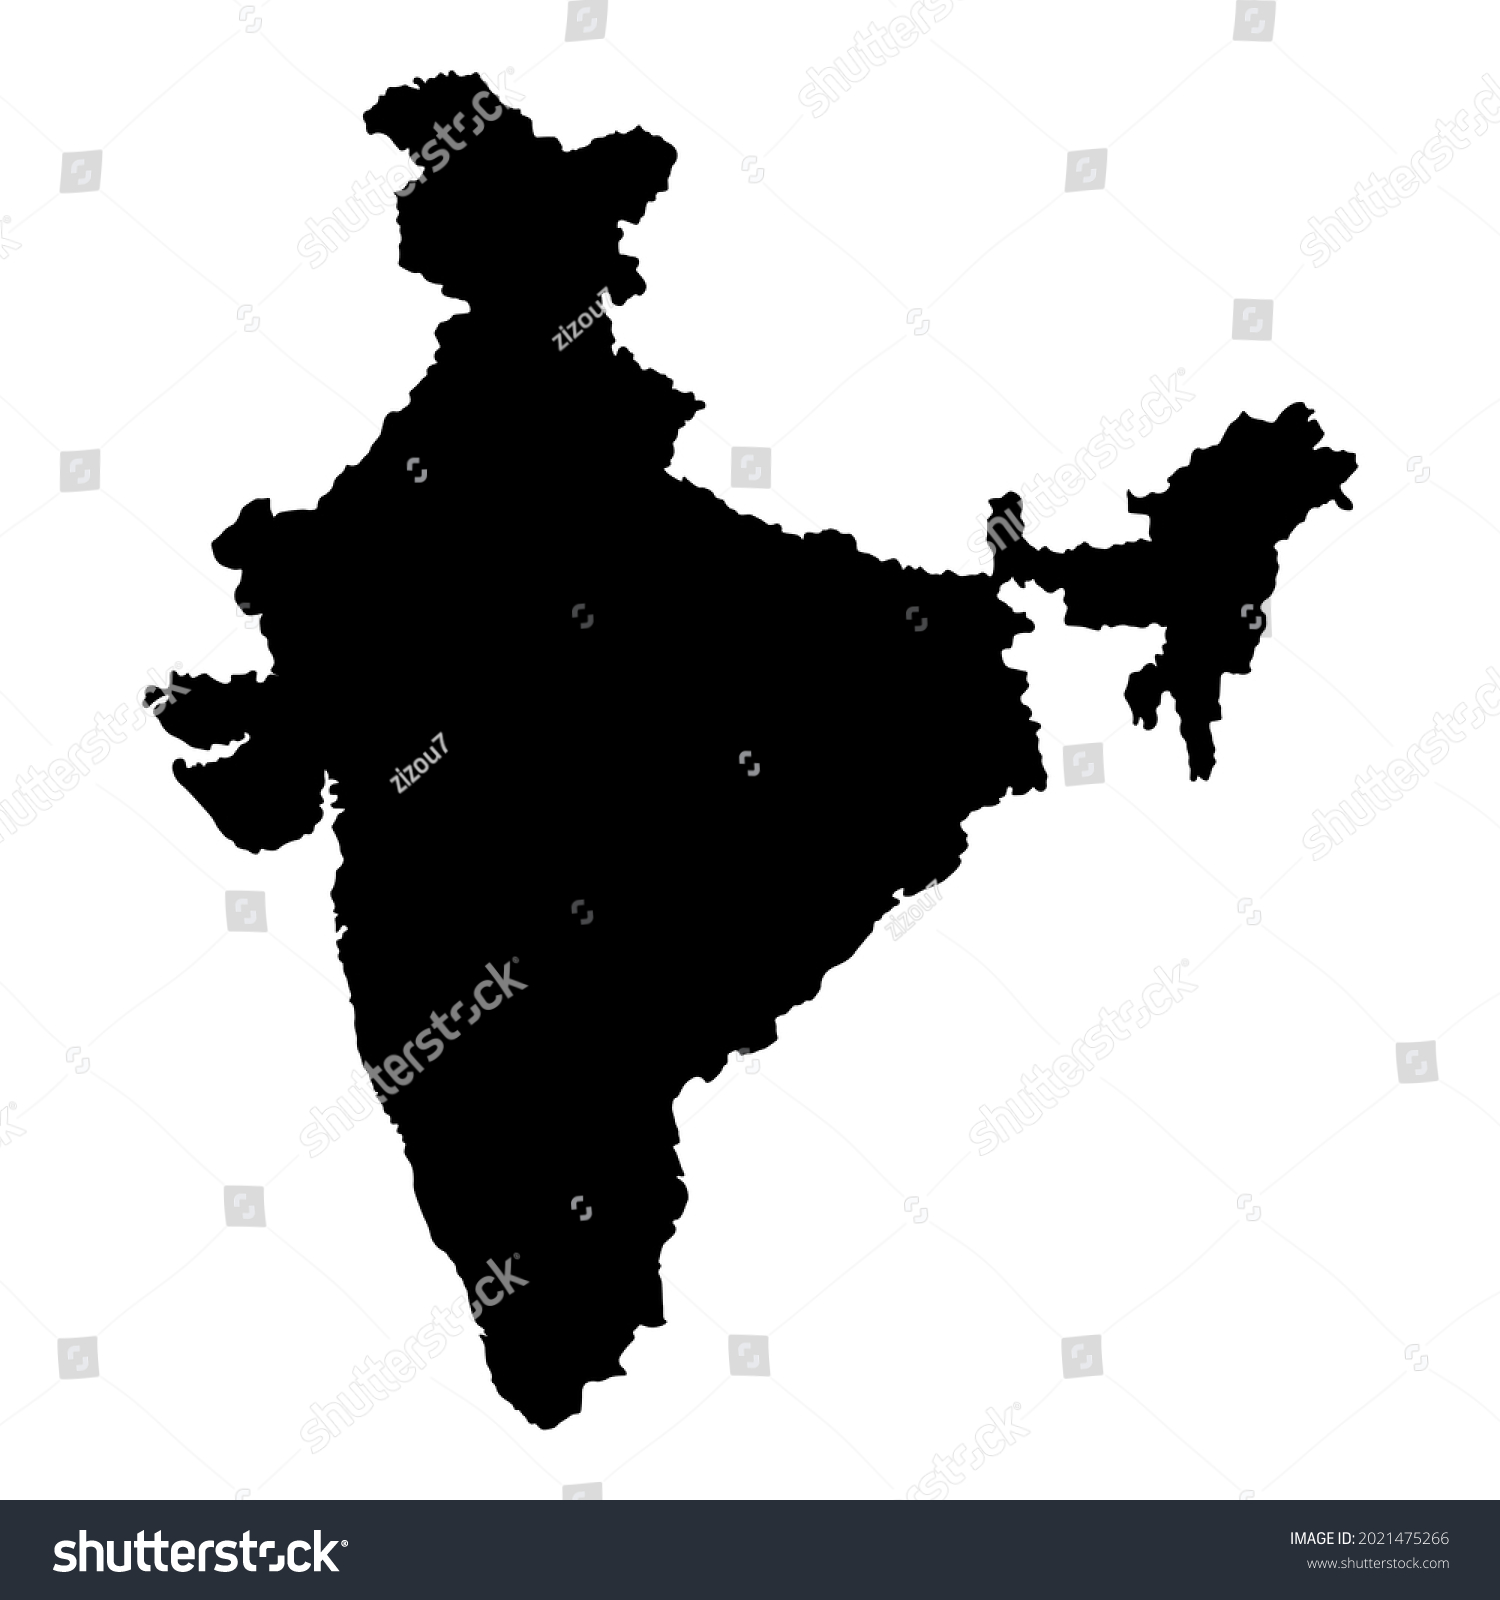 Stock Vector India National Map Vector Image On White Background 2021475266 